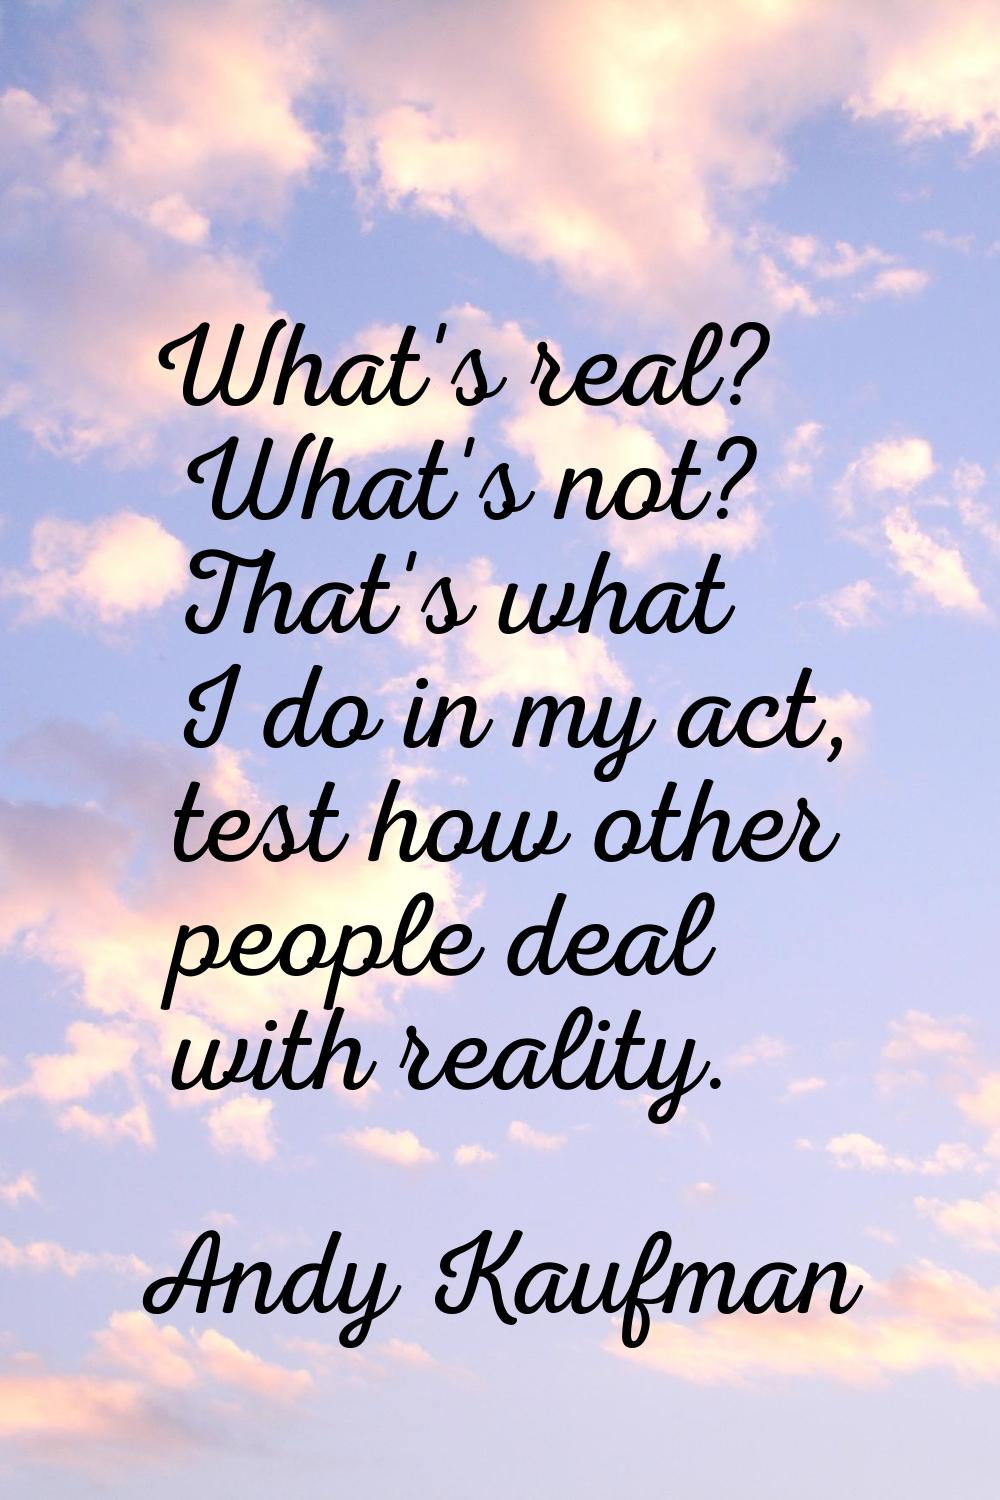 What's real? What's not? That's what I do in my act, test how other people deal with reality.